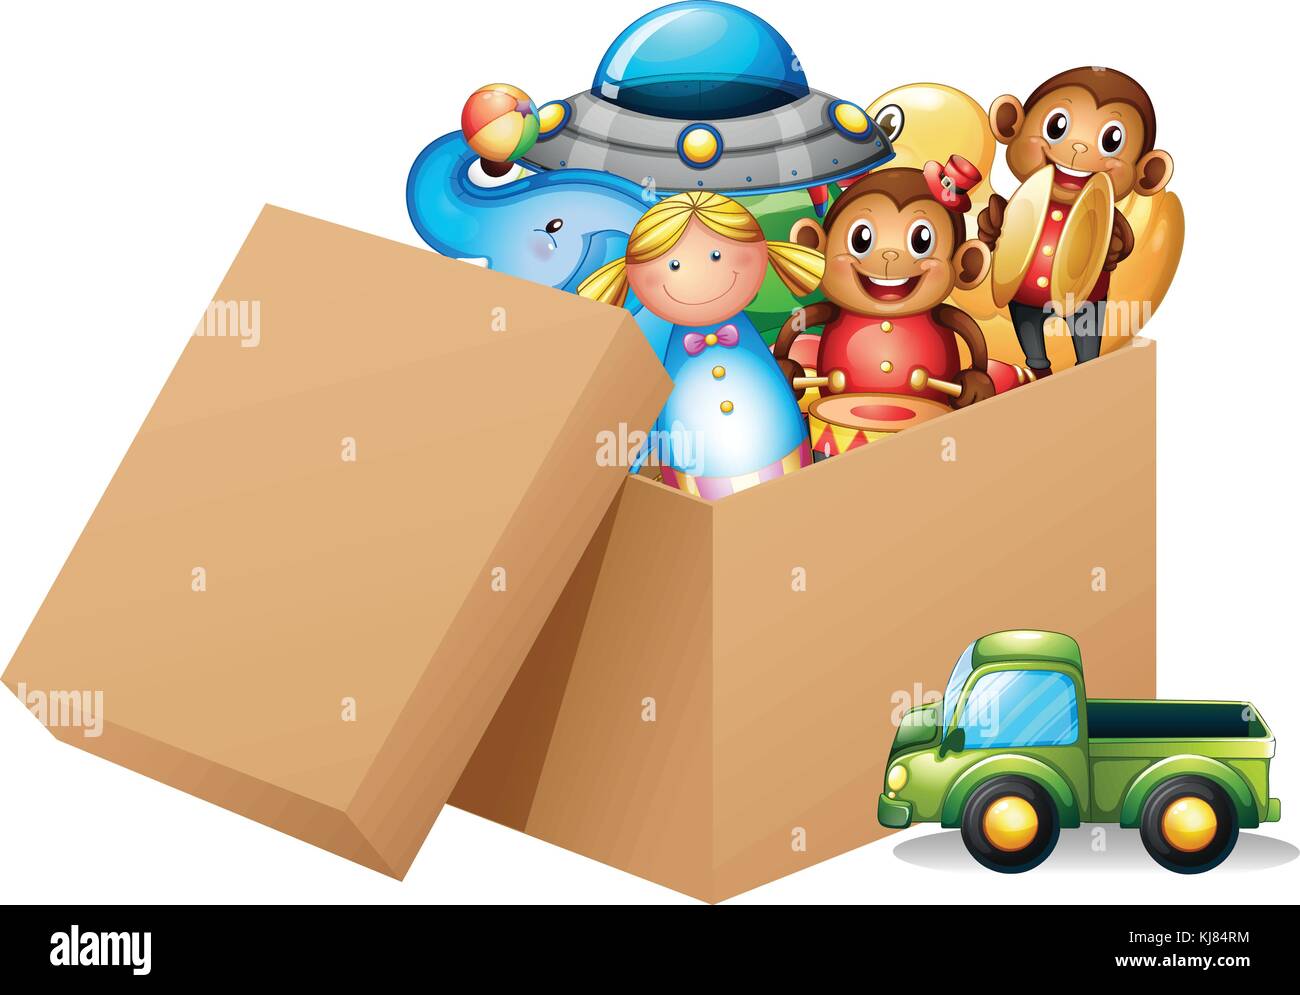 Illustration of a box full of different toys on a white background Stock Vector